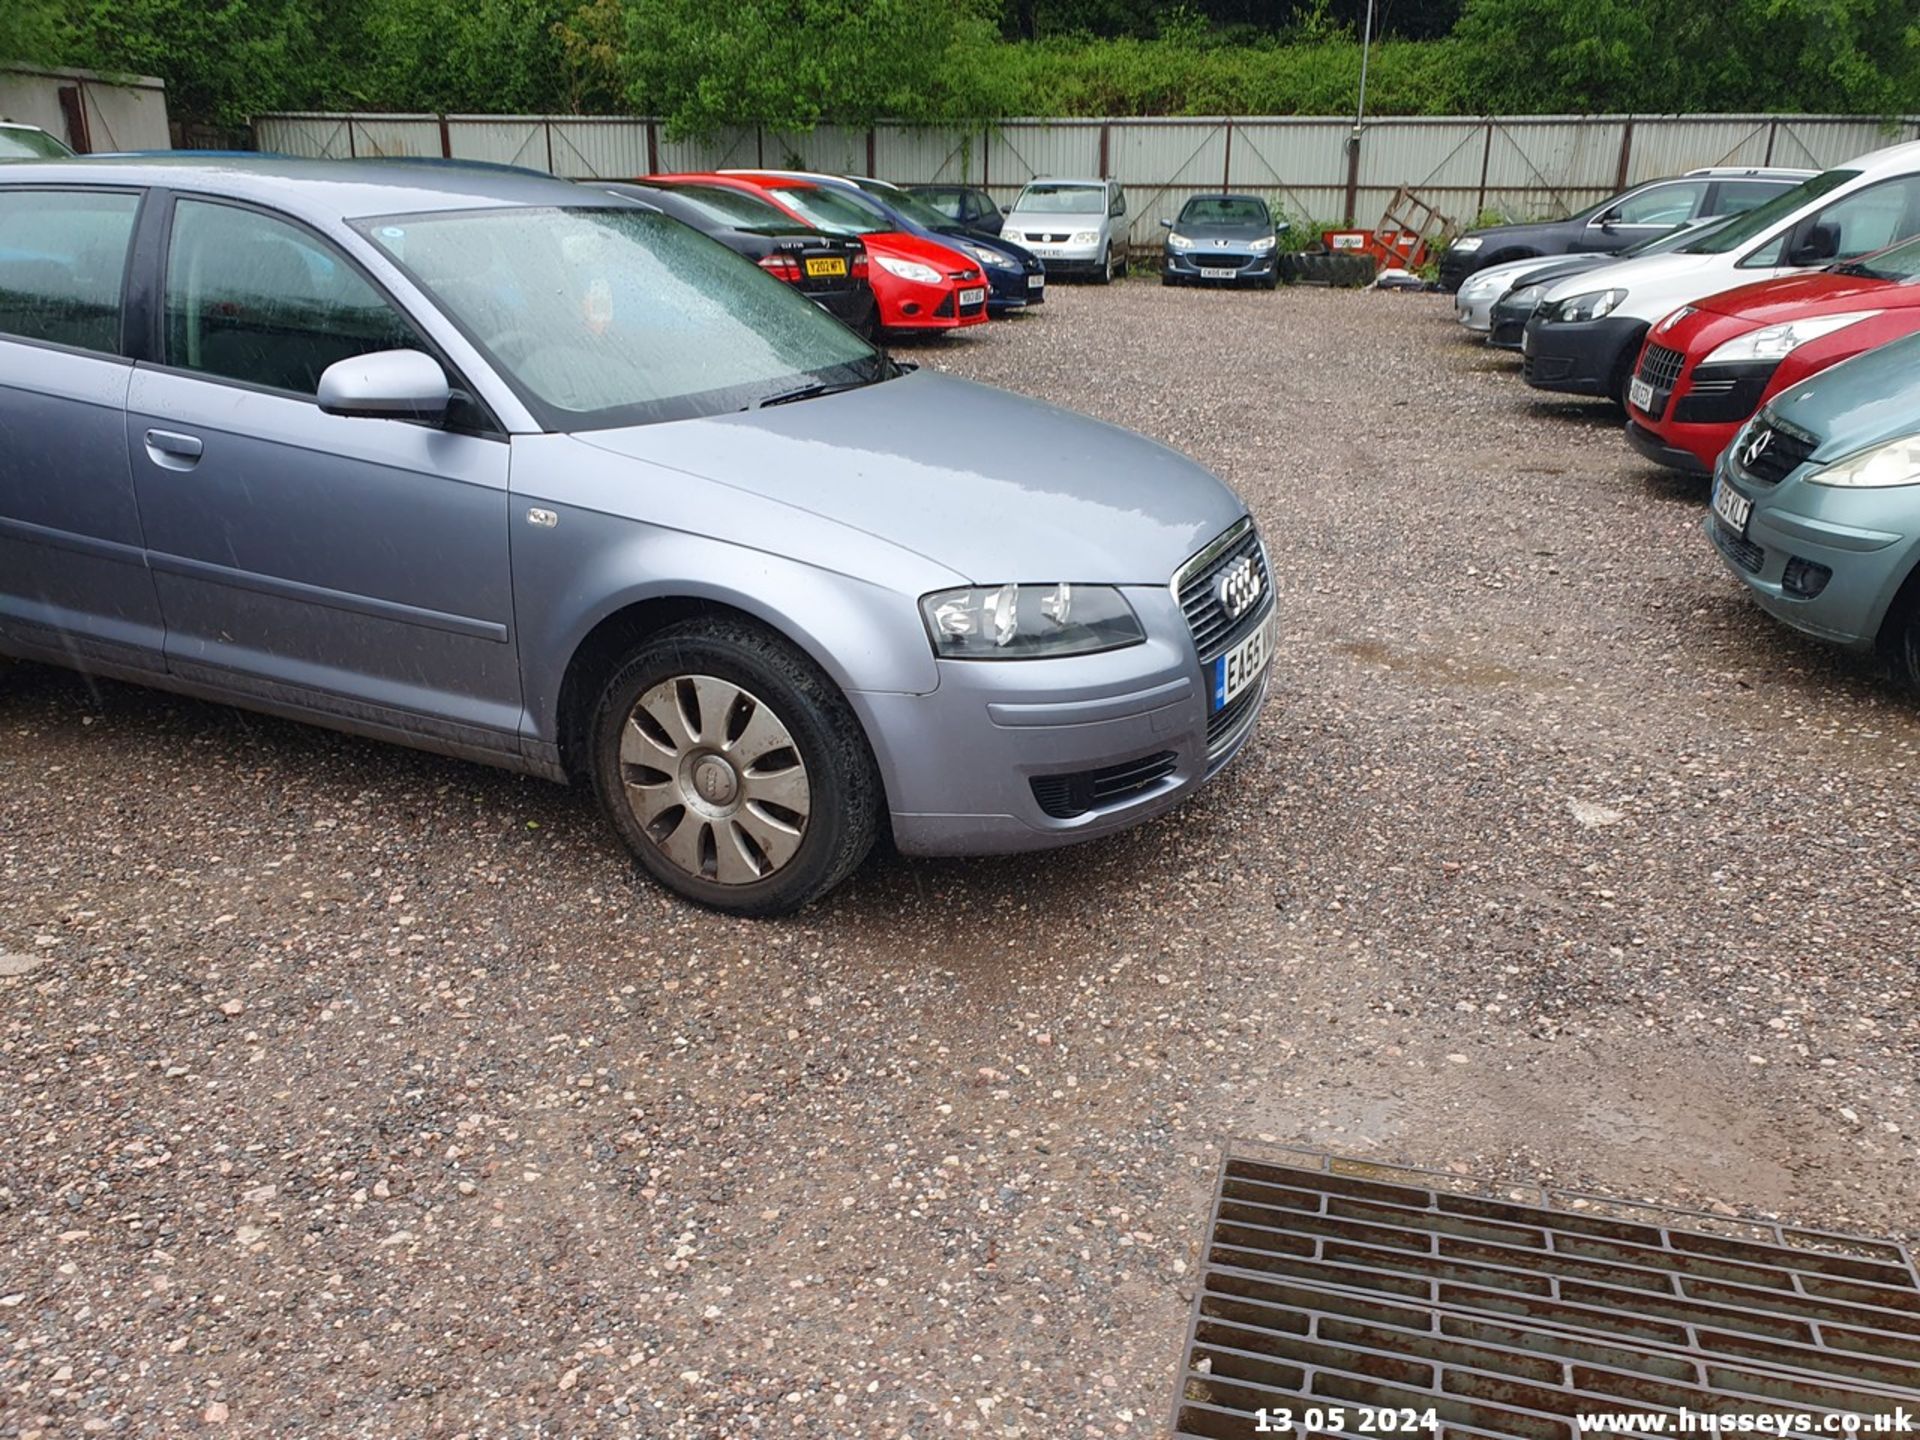 06/55 AUDI A3 SPECIAL EDITION - 1595cc 5dr Hatchback (Silver, 129k) - Image 11 of 38